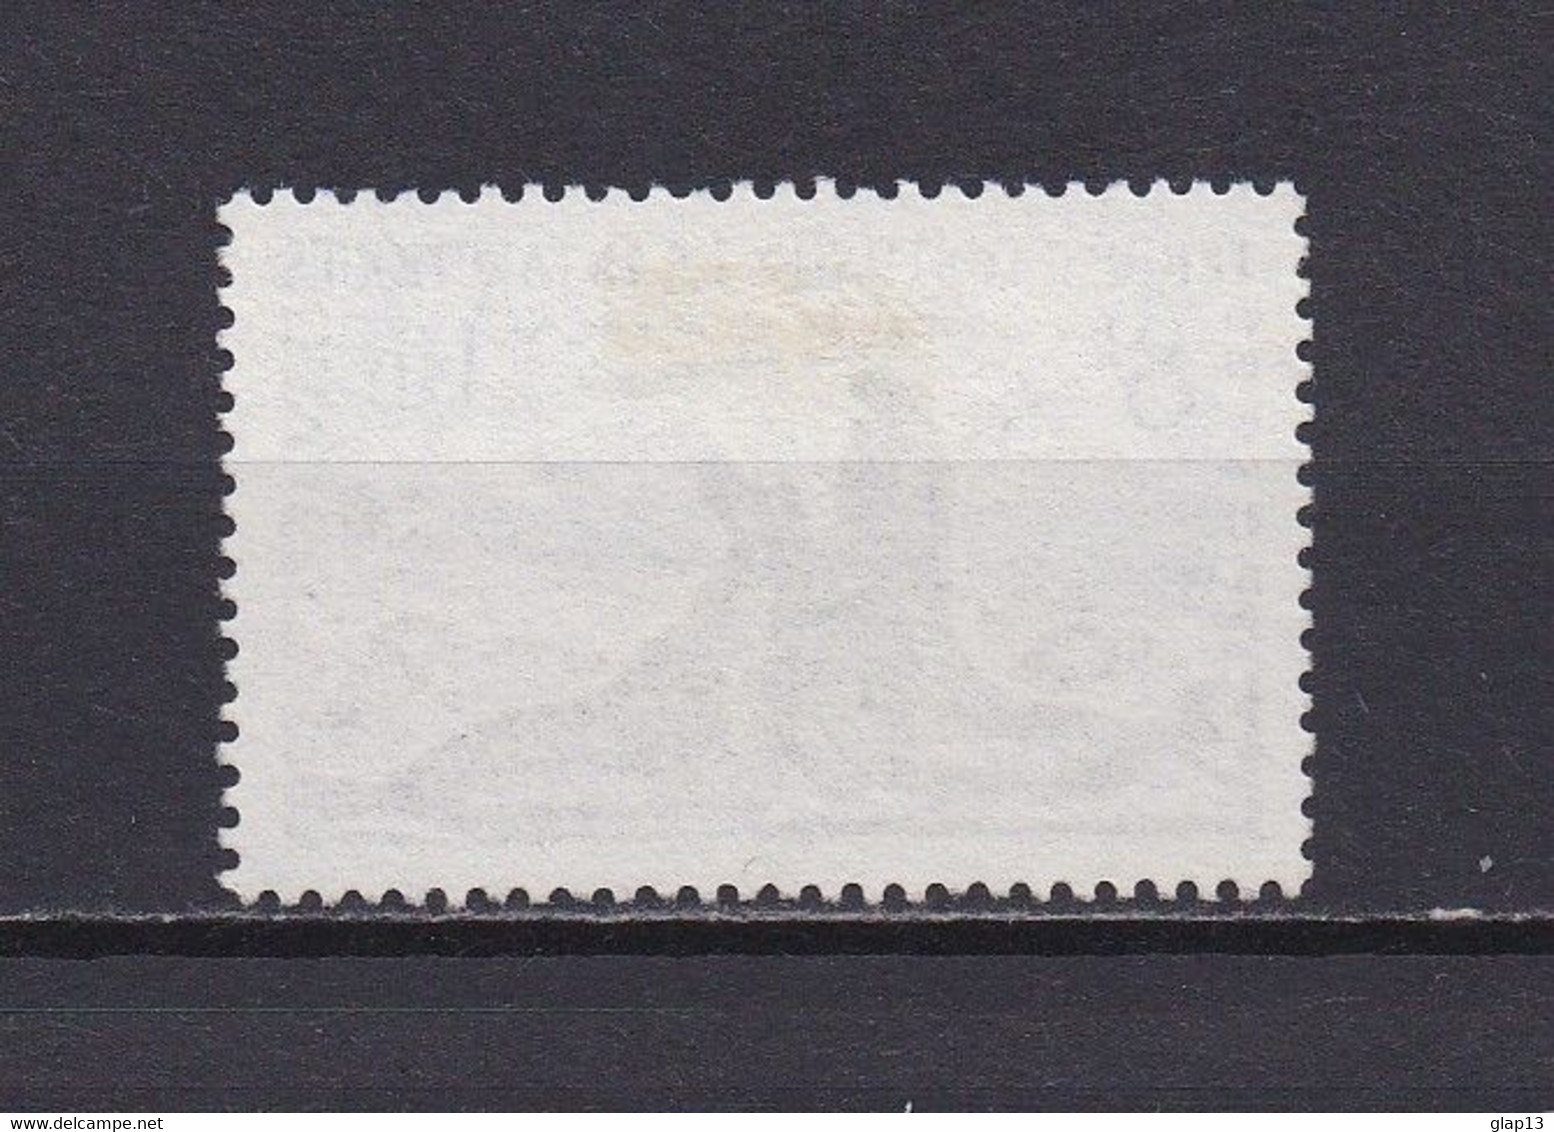 TAFF 1959 TIMBRE N°13C OBLITERE ELEPHANT DE MER - Used Stamps